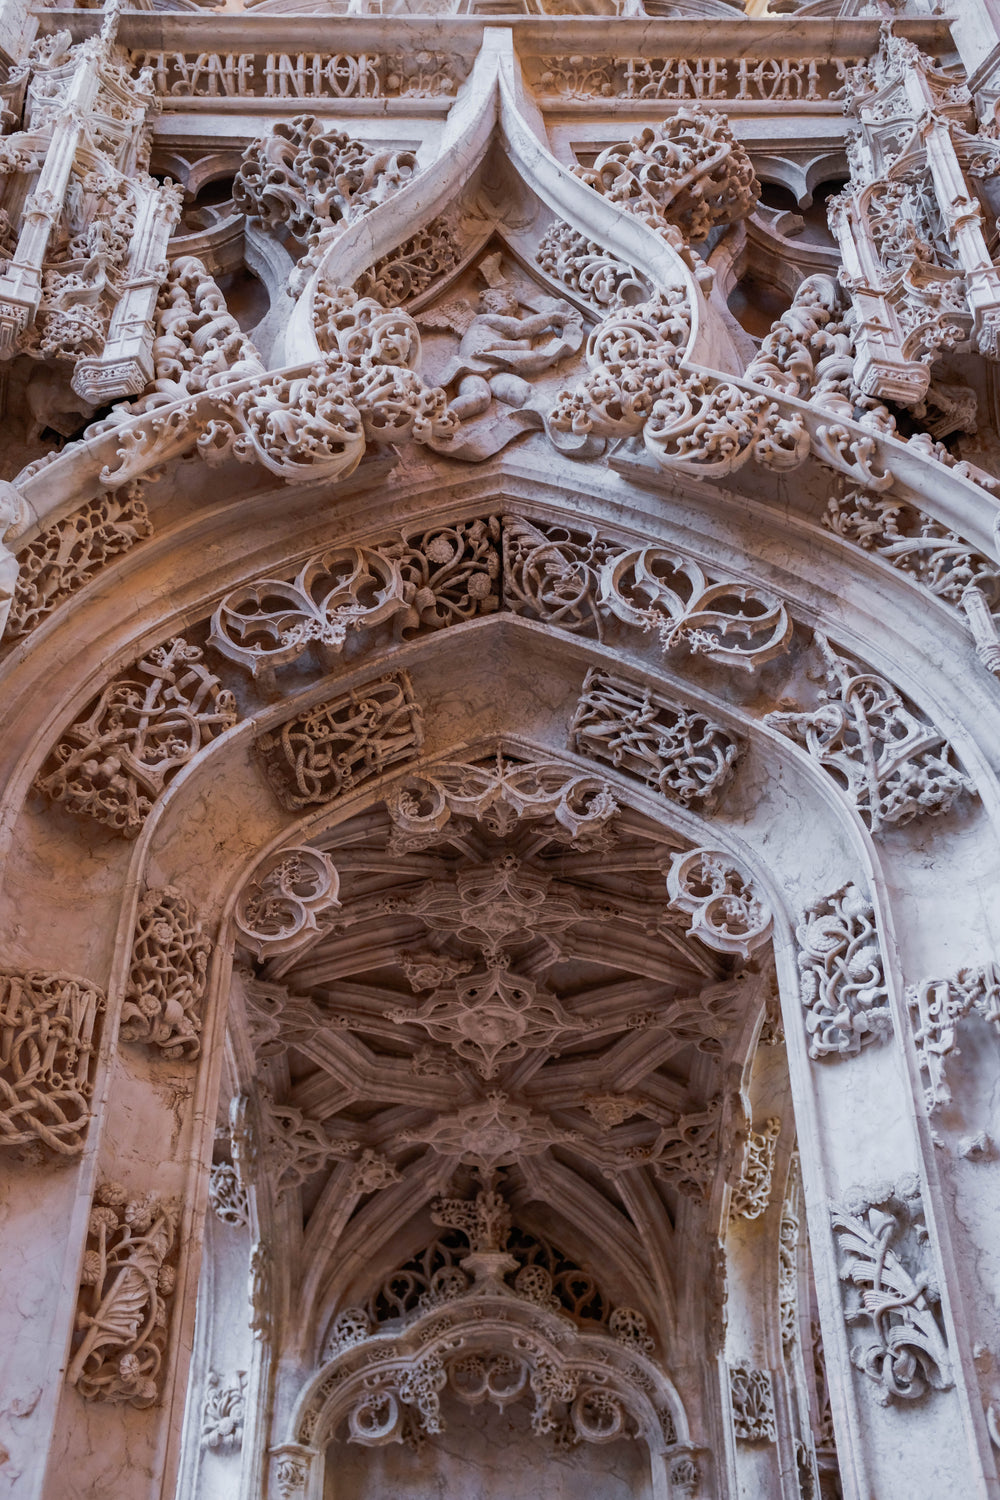 a marble archway with figures hewn into it